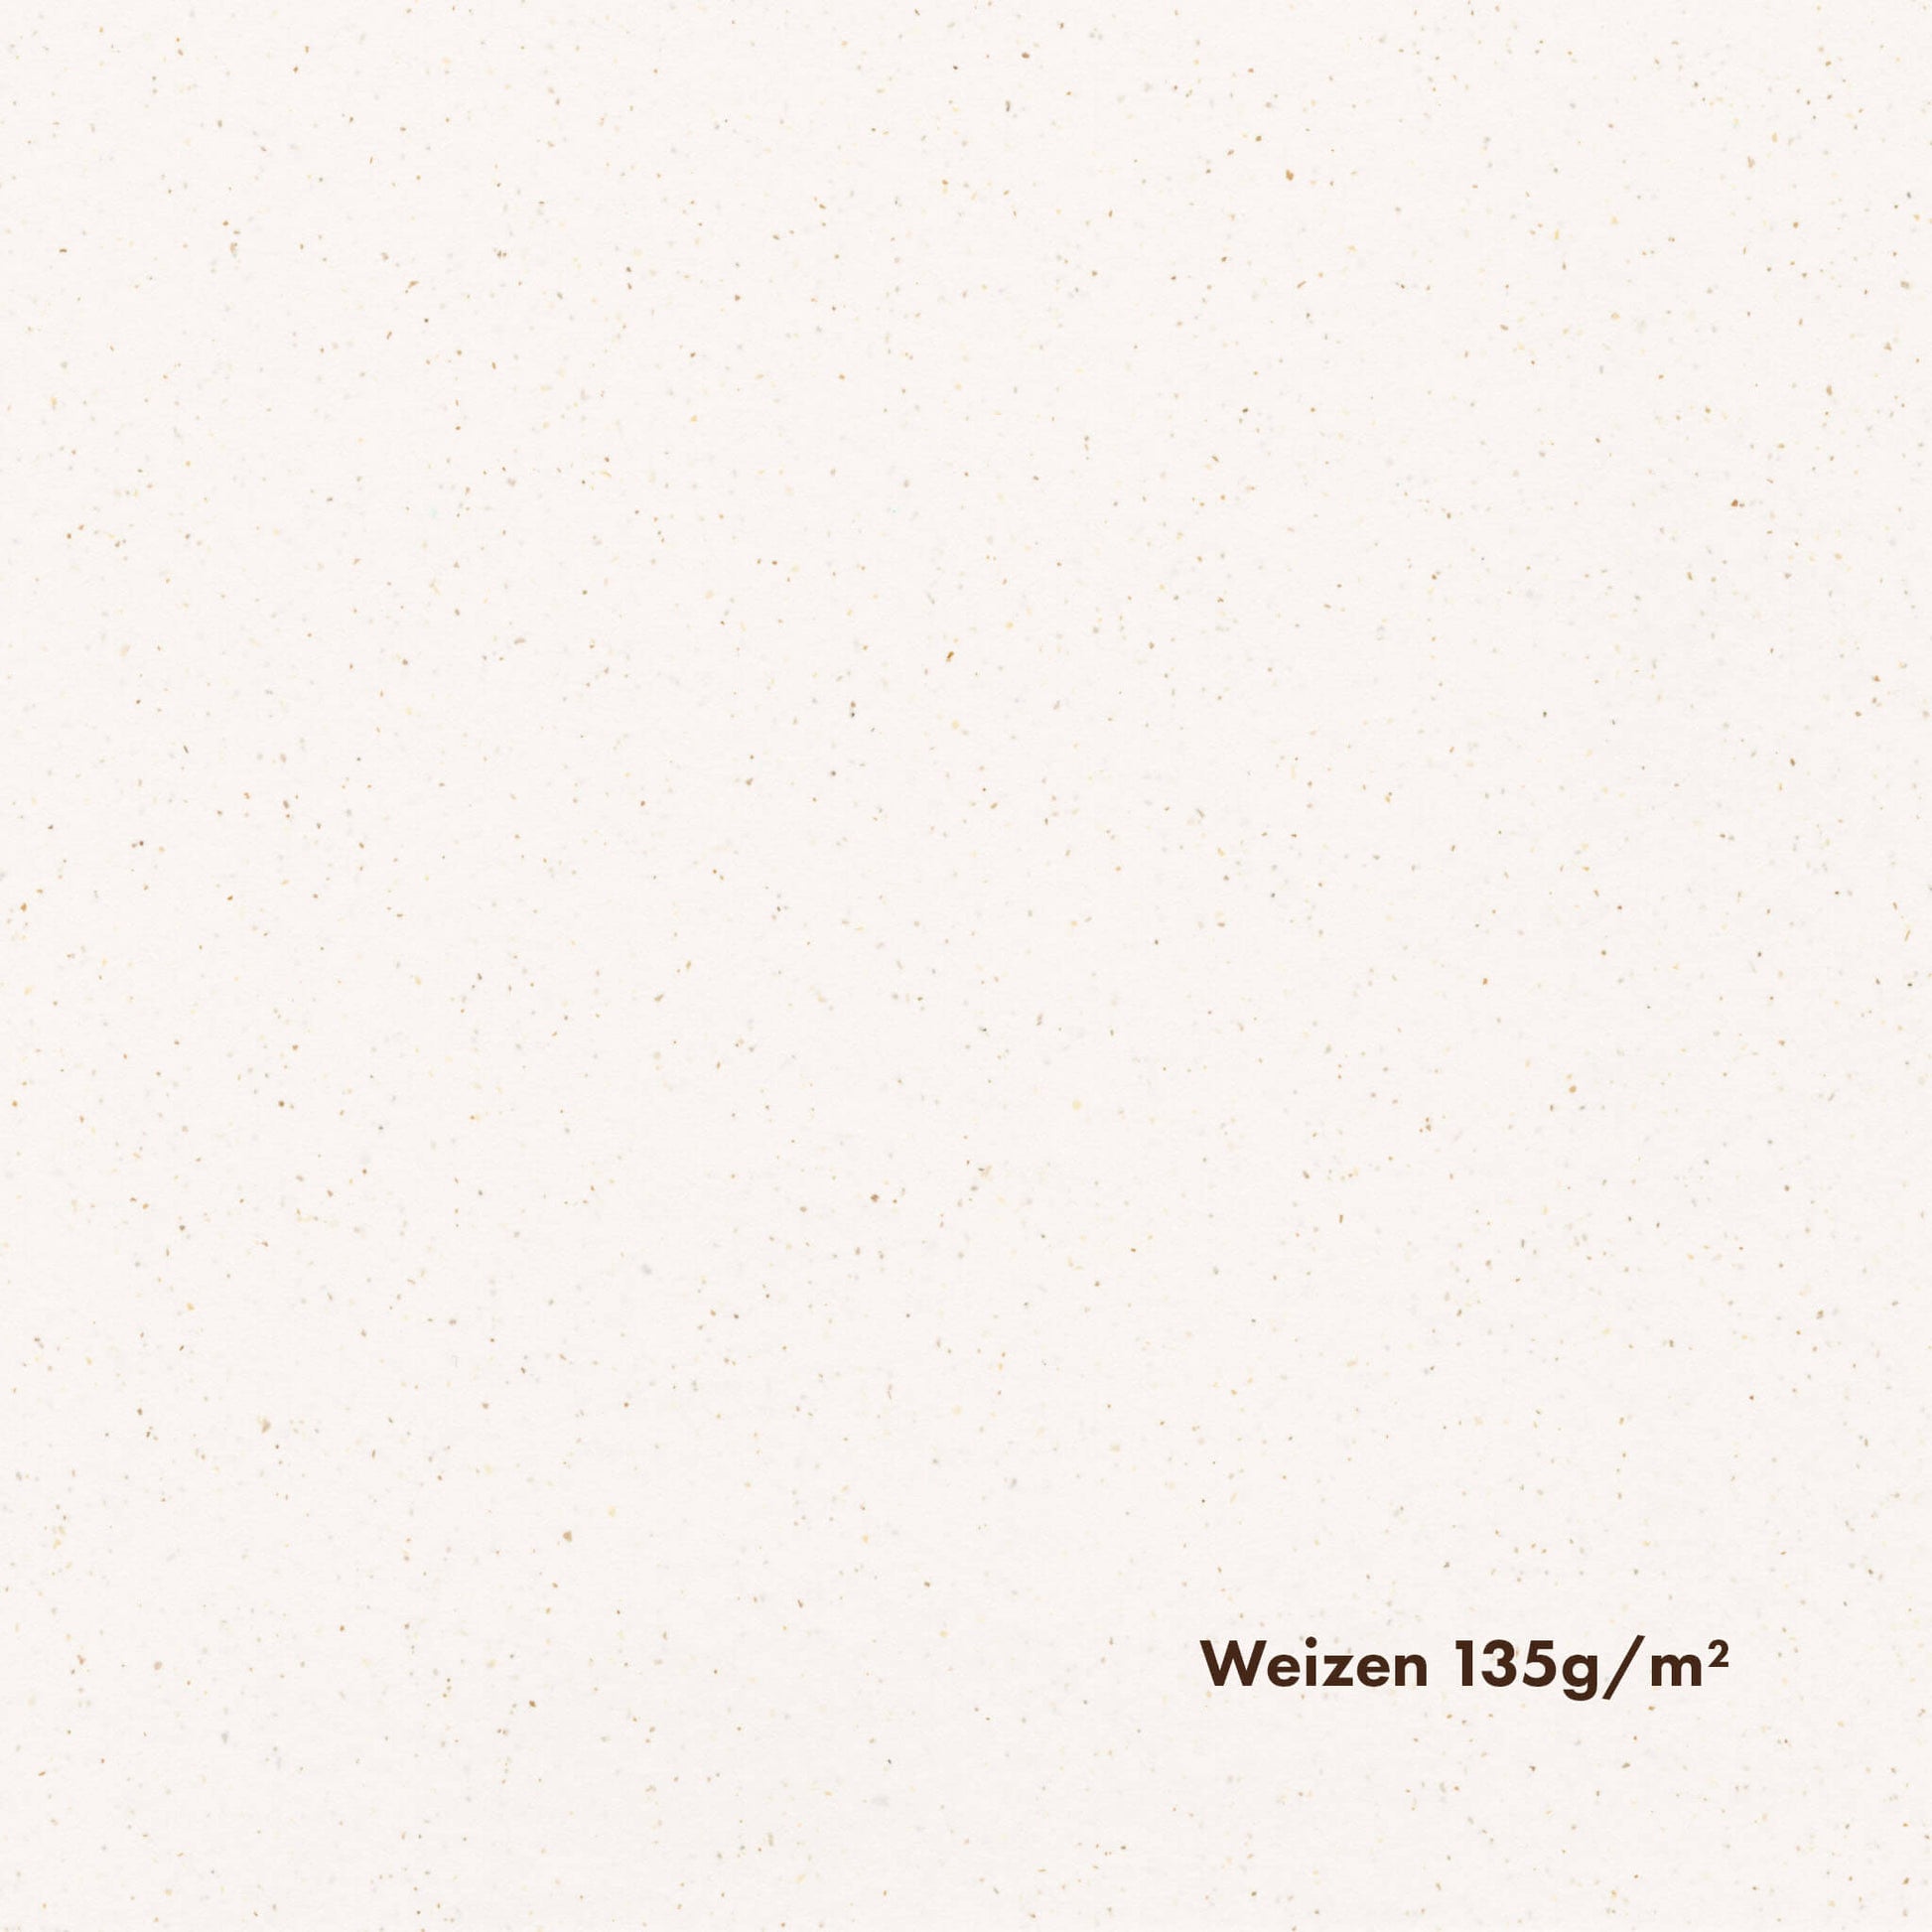 Close-up of white-toned pulp paper with noticeable brown speckles, with the text 'Weizen 135g/m2' printed on it.